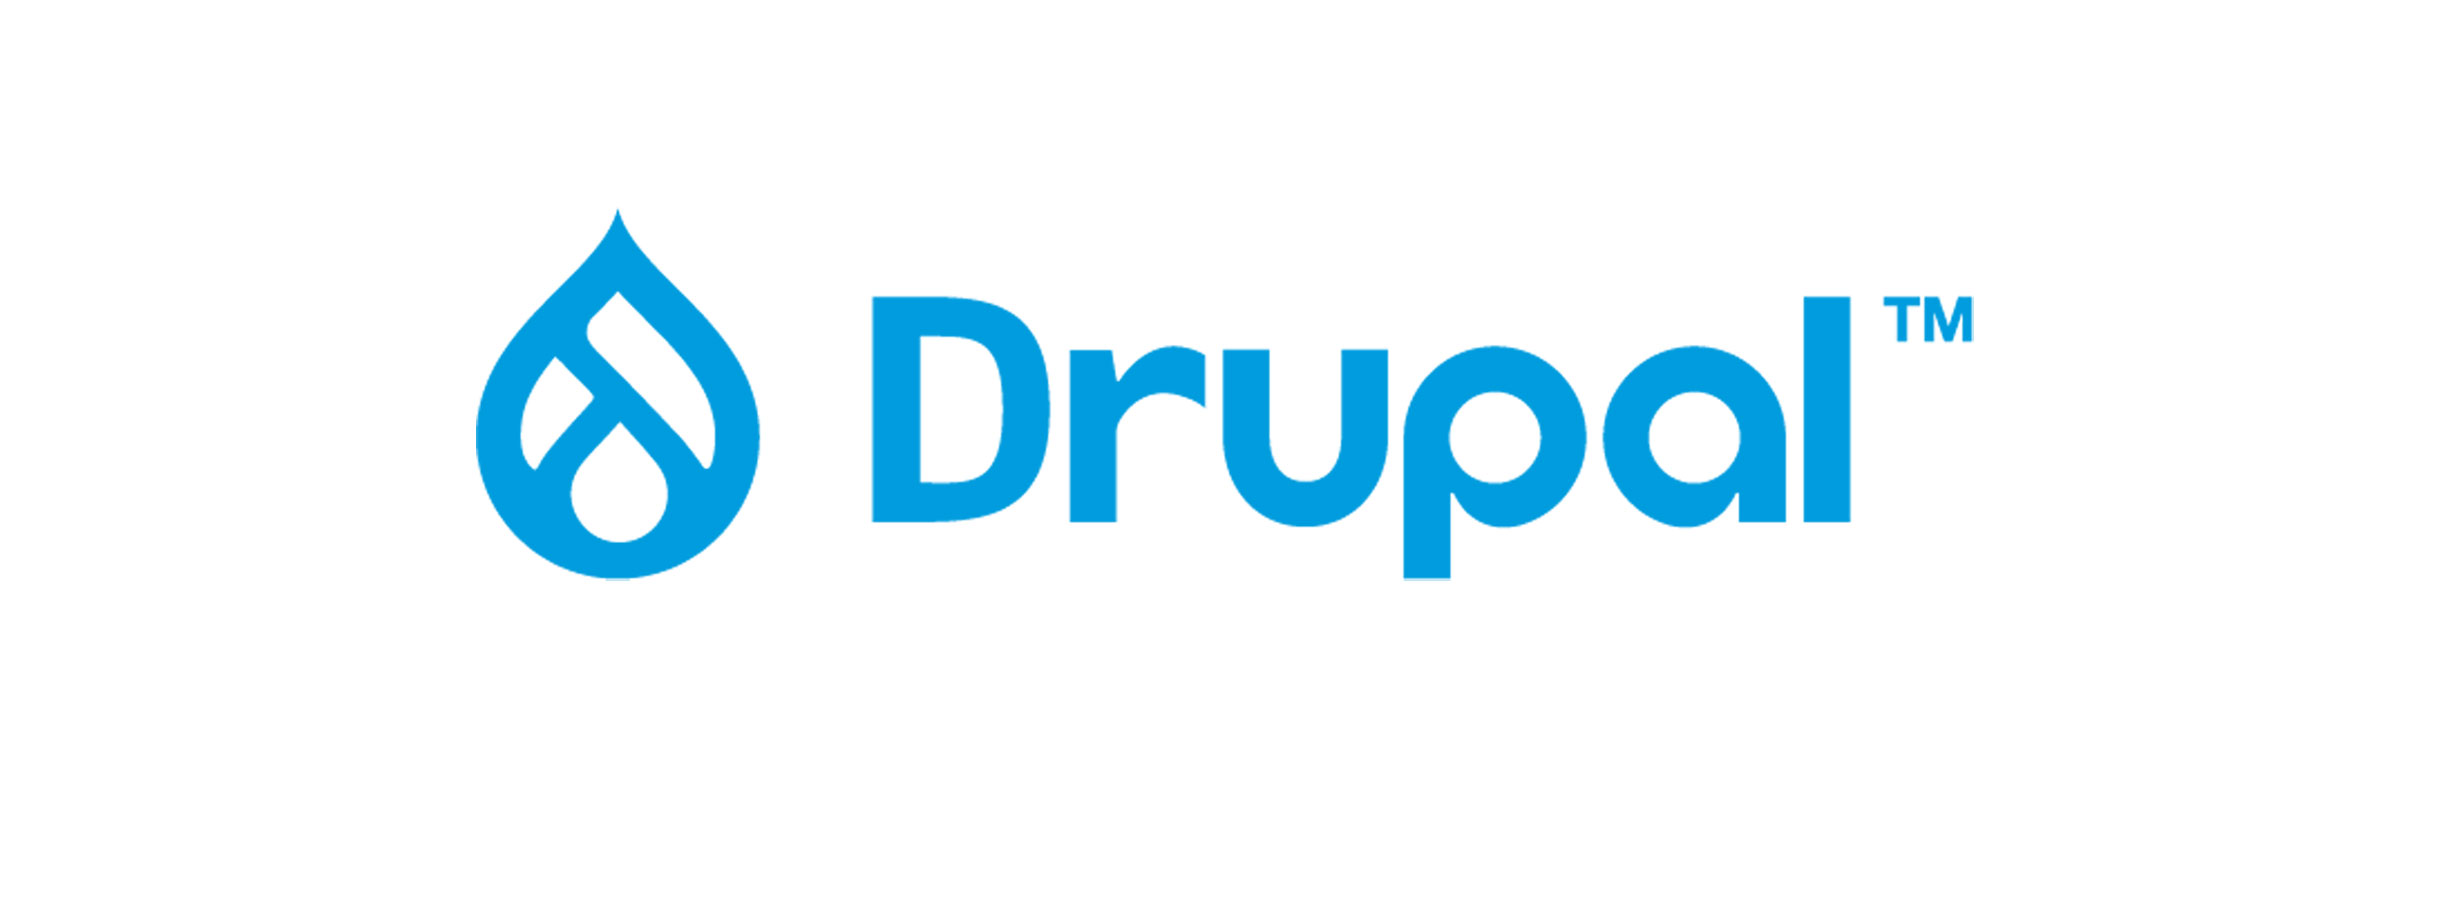 updates of drupal core are not supported at this time